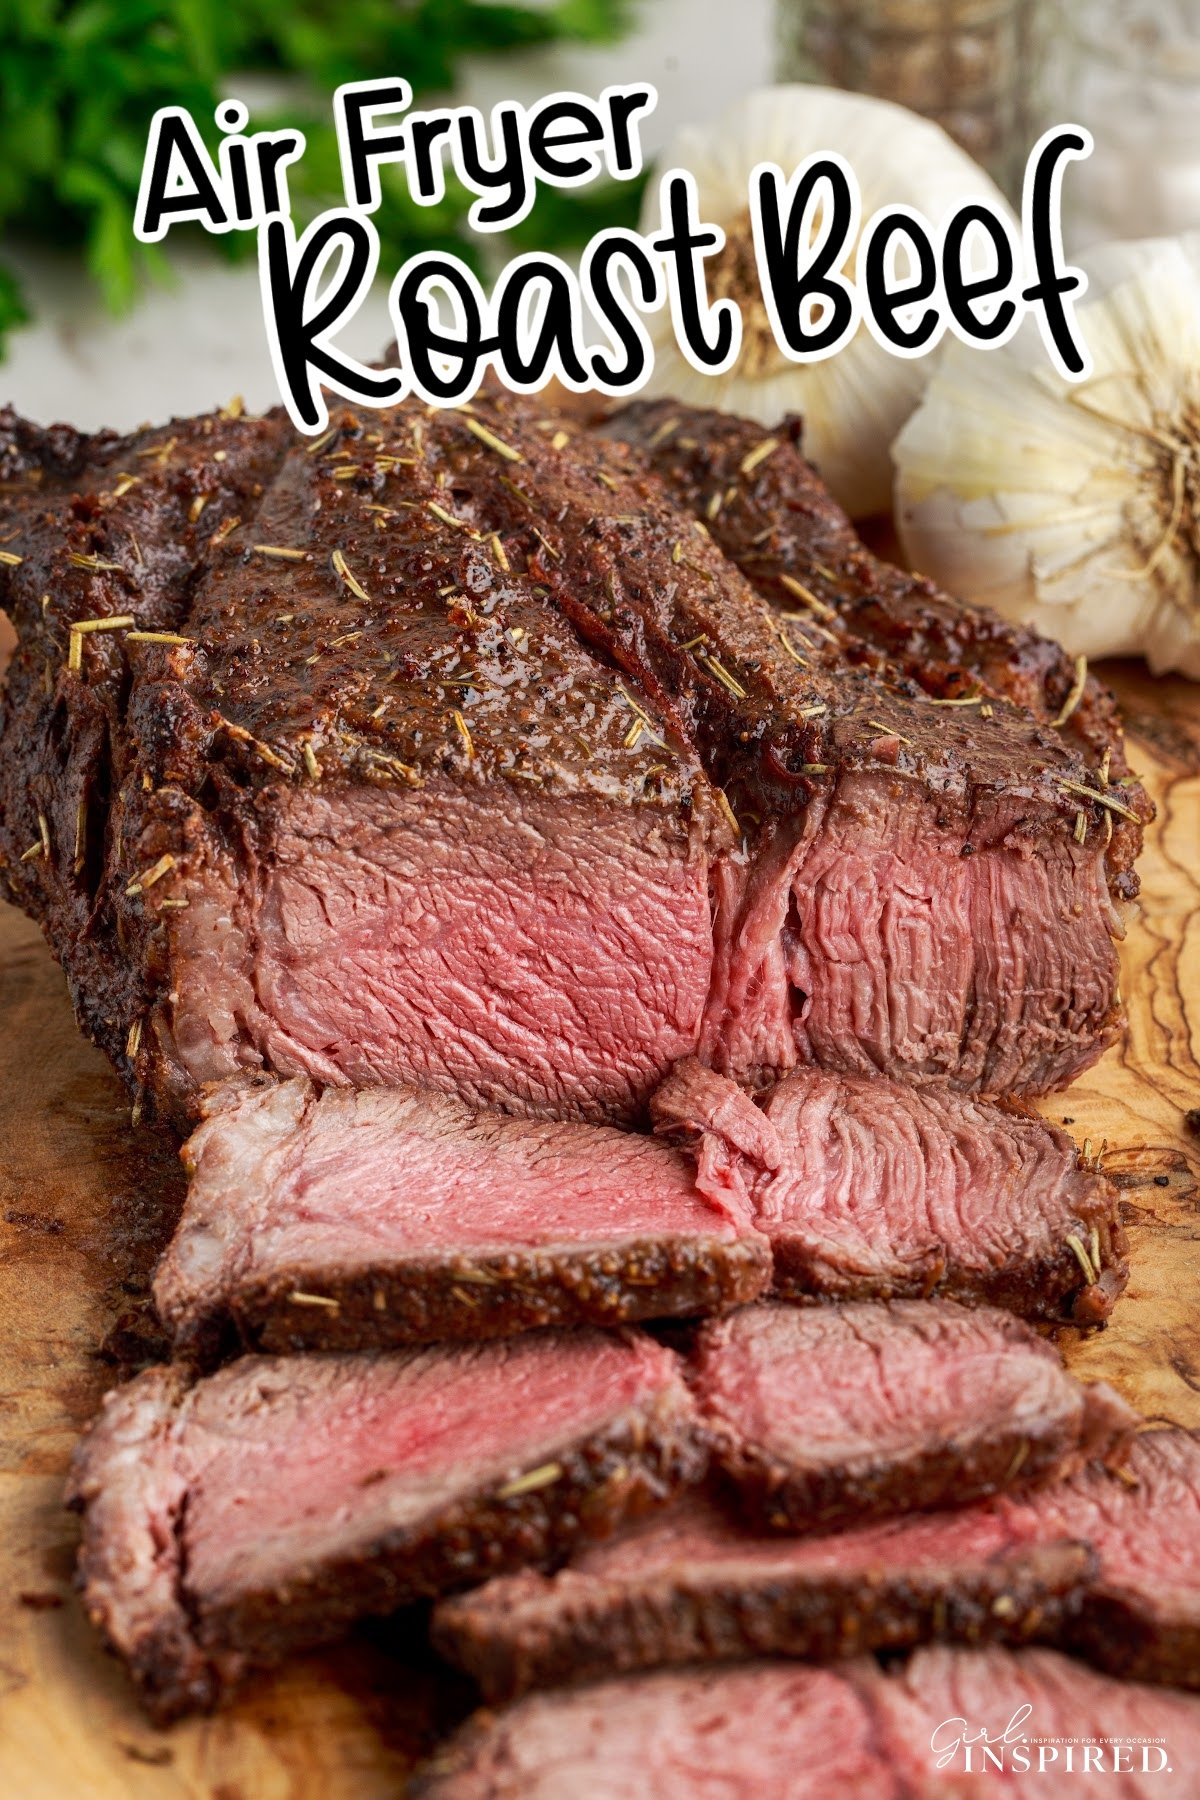 Front view of Air Fryer Roast Beef slices cut from it with text overlay.